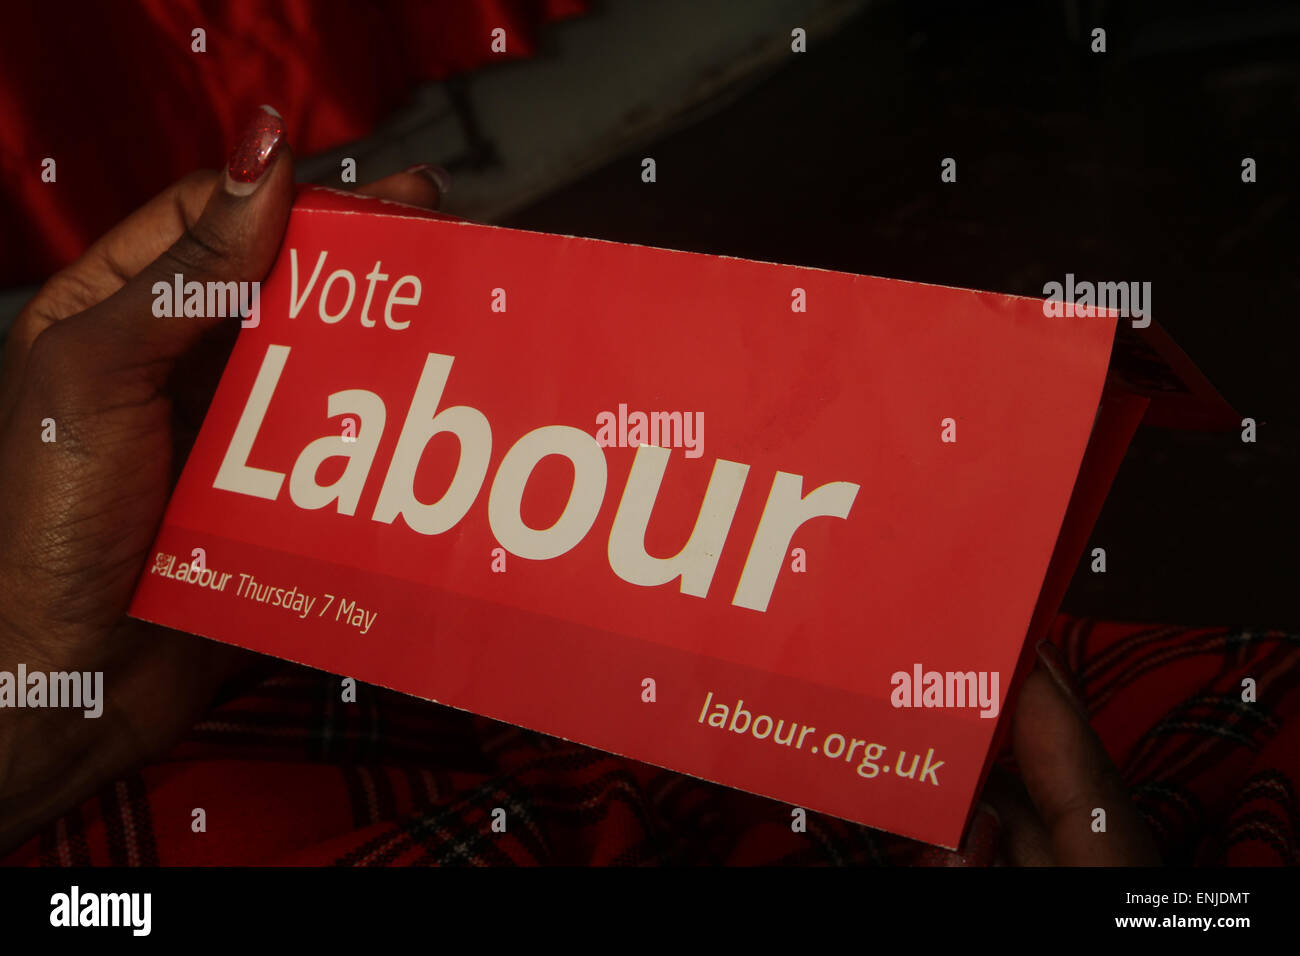 London, UK. 6 May 2015. A voter reads a Labour election flyer. Voters in the UK prepare to go to the polls on Thursday 7 May, in an election seen as one of the closest-fought in years. Britain's two-party system appears under severe threat, with the distinct prospect that between them Labour and the Conservatives will struggle to gain two-thirds of the votes cast. Compare that with their near 90% vote share just 50 years ago. Credit : David Mbiyu/ Alamy Live News Stock Photo